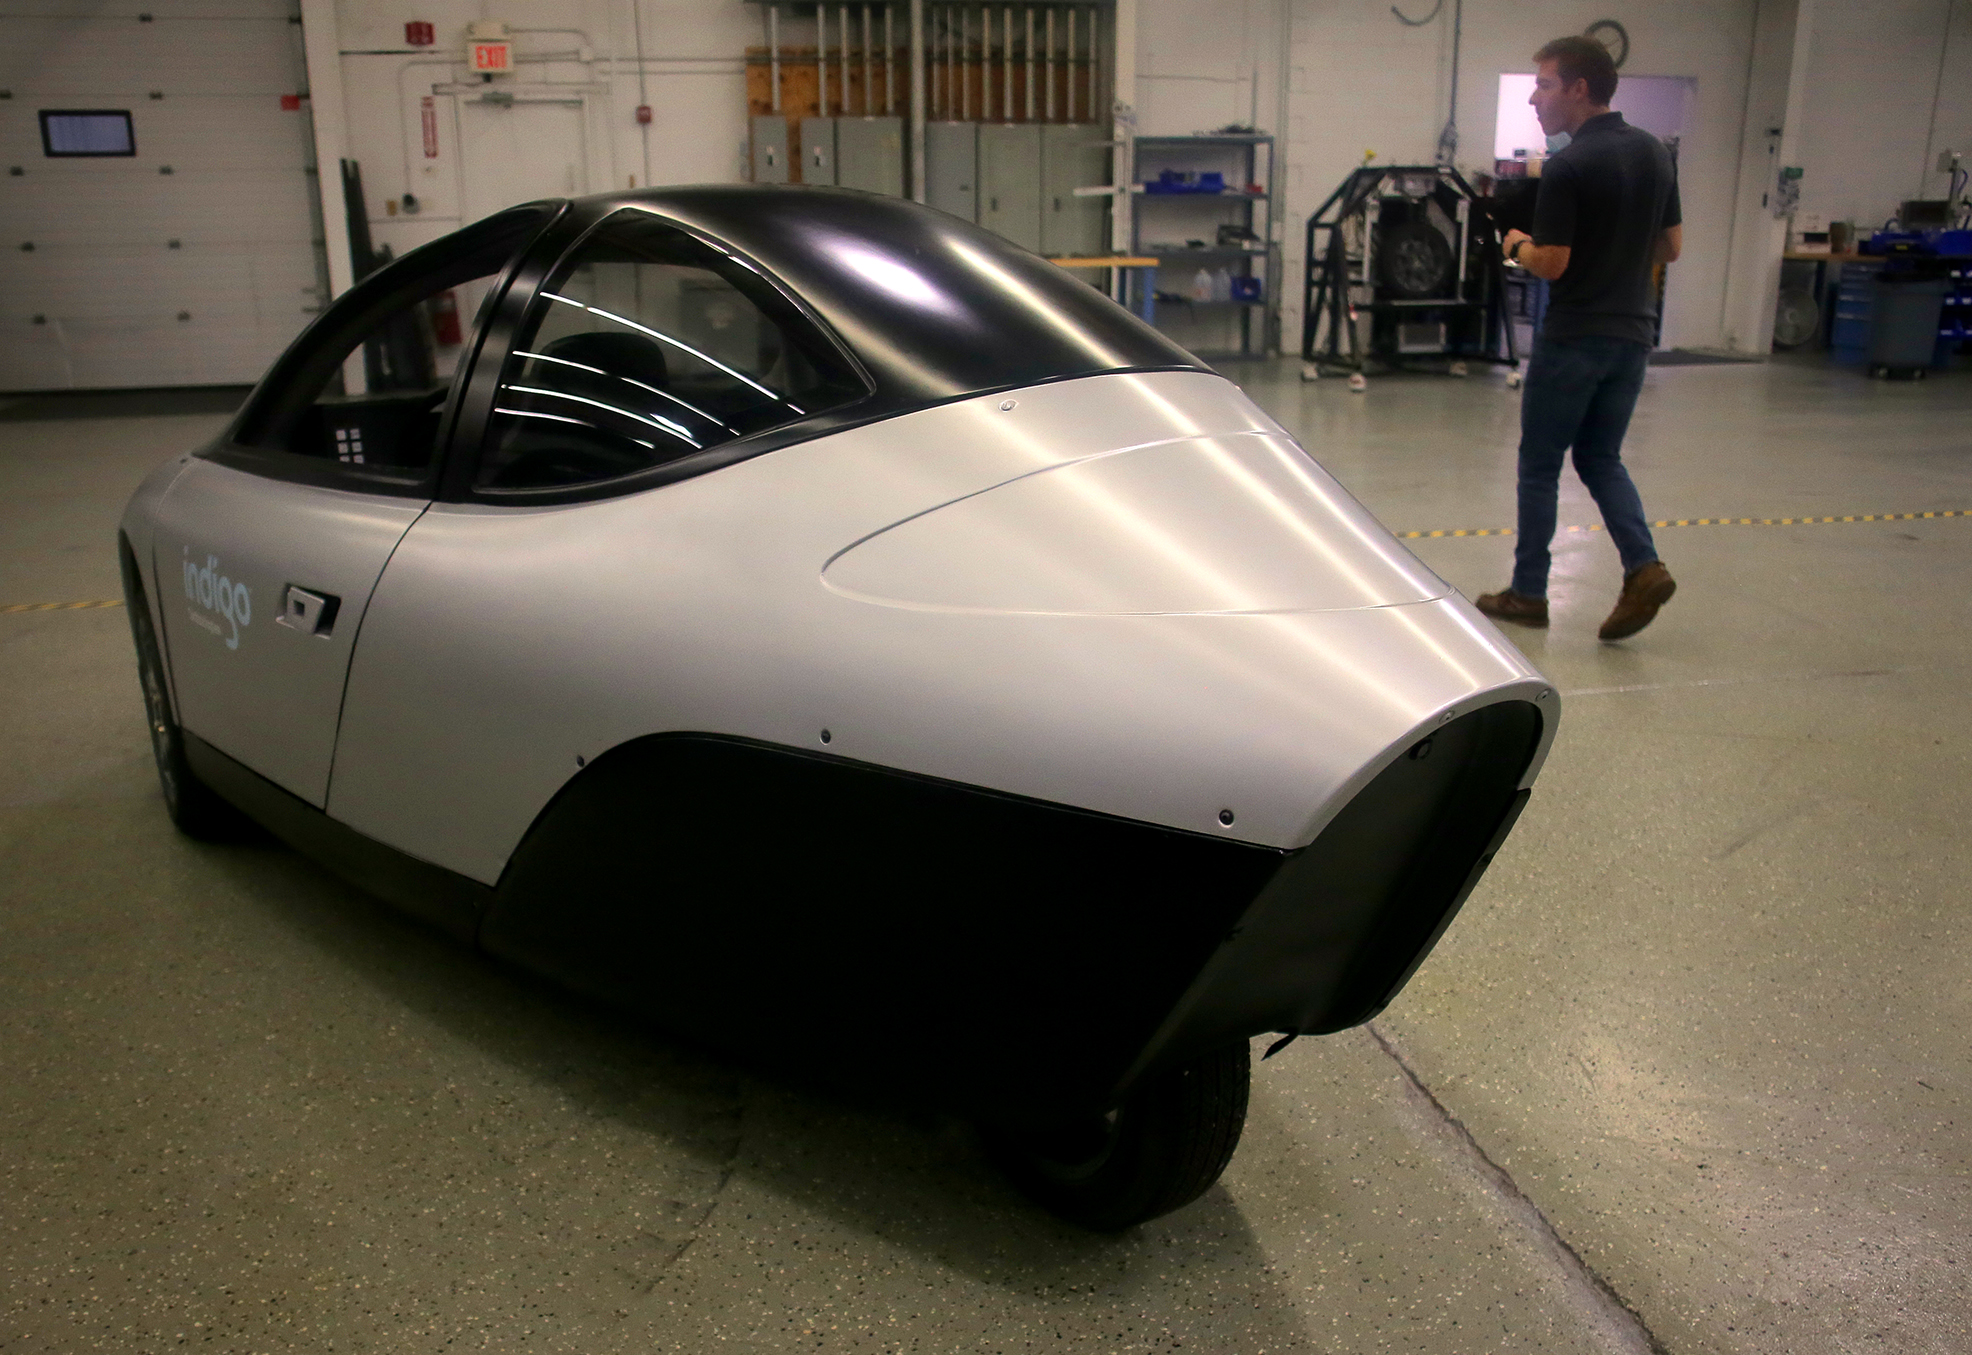 The Indigo Draco prototype sits inside the lab space.